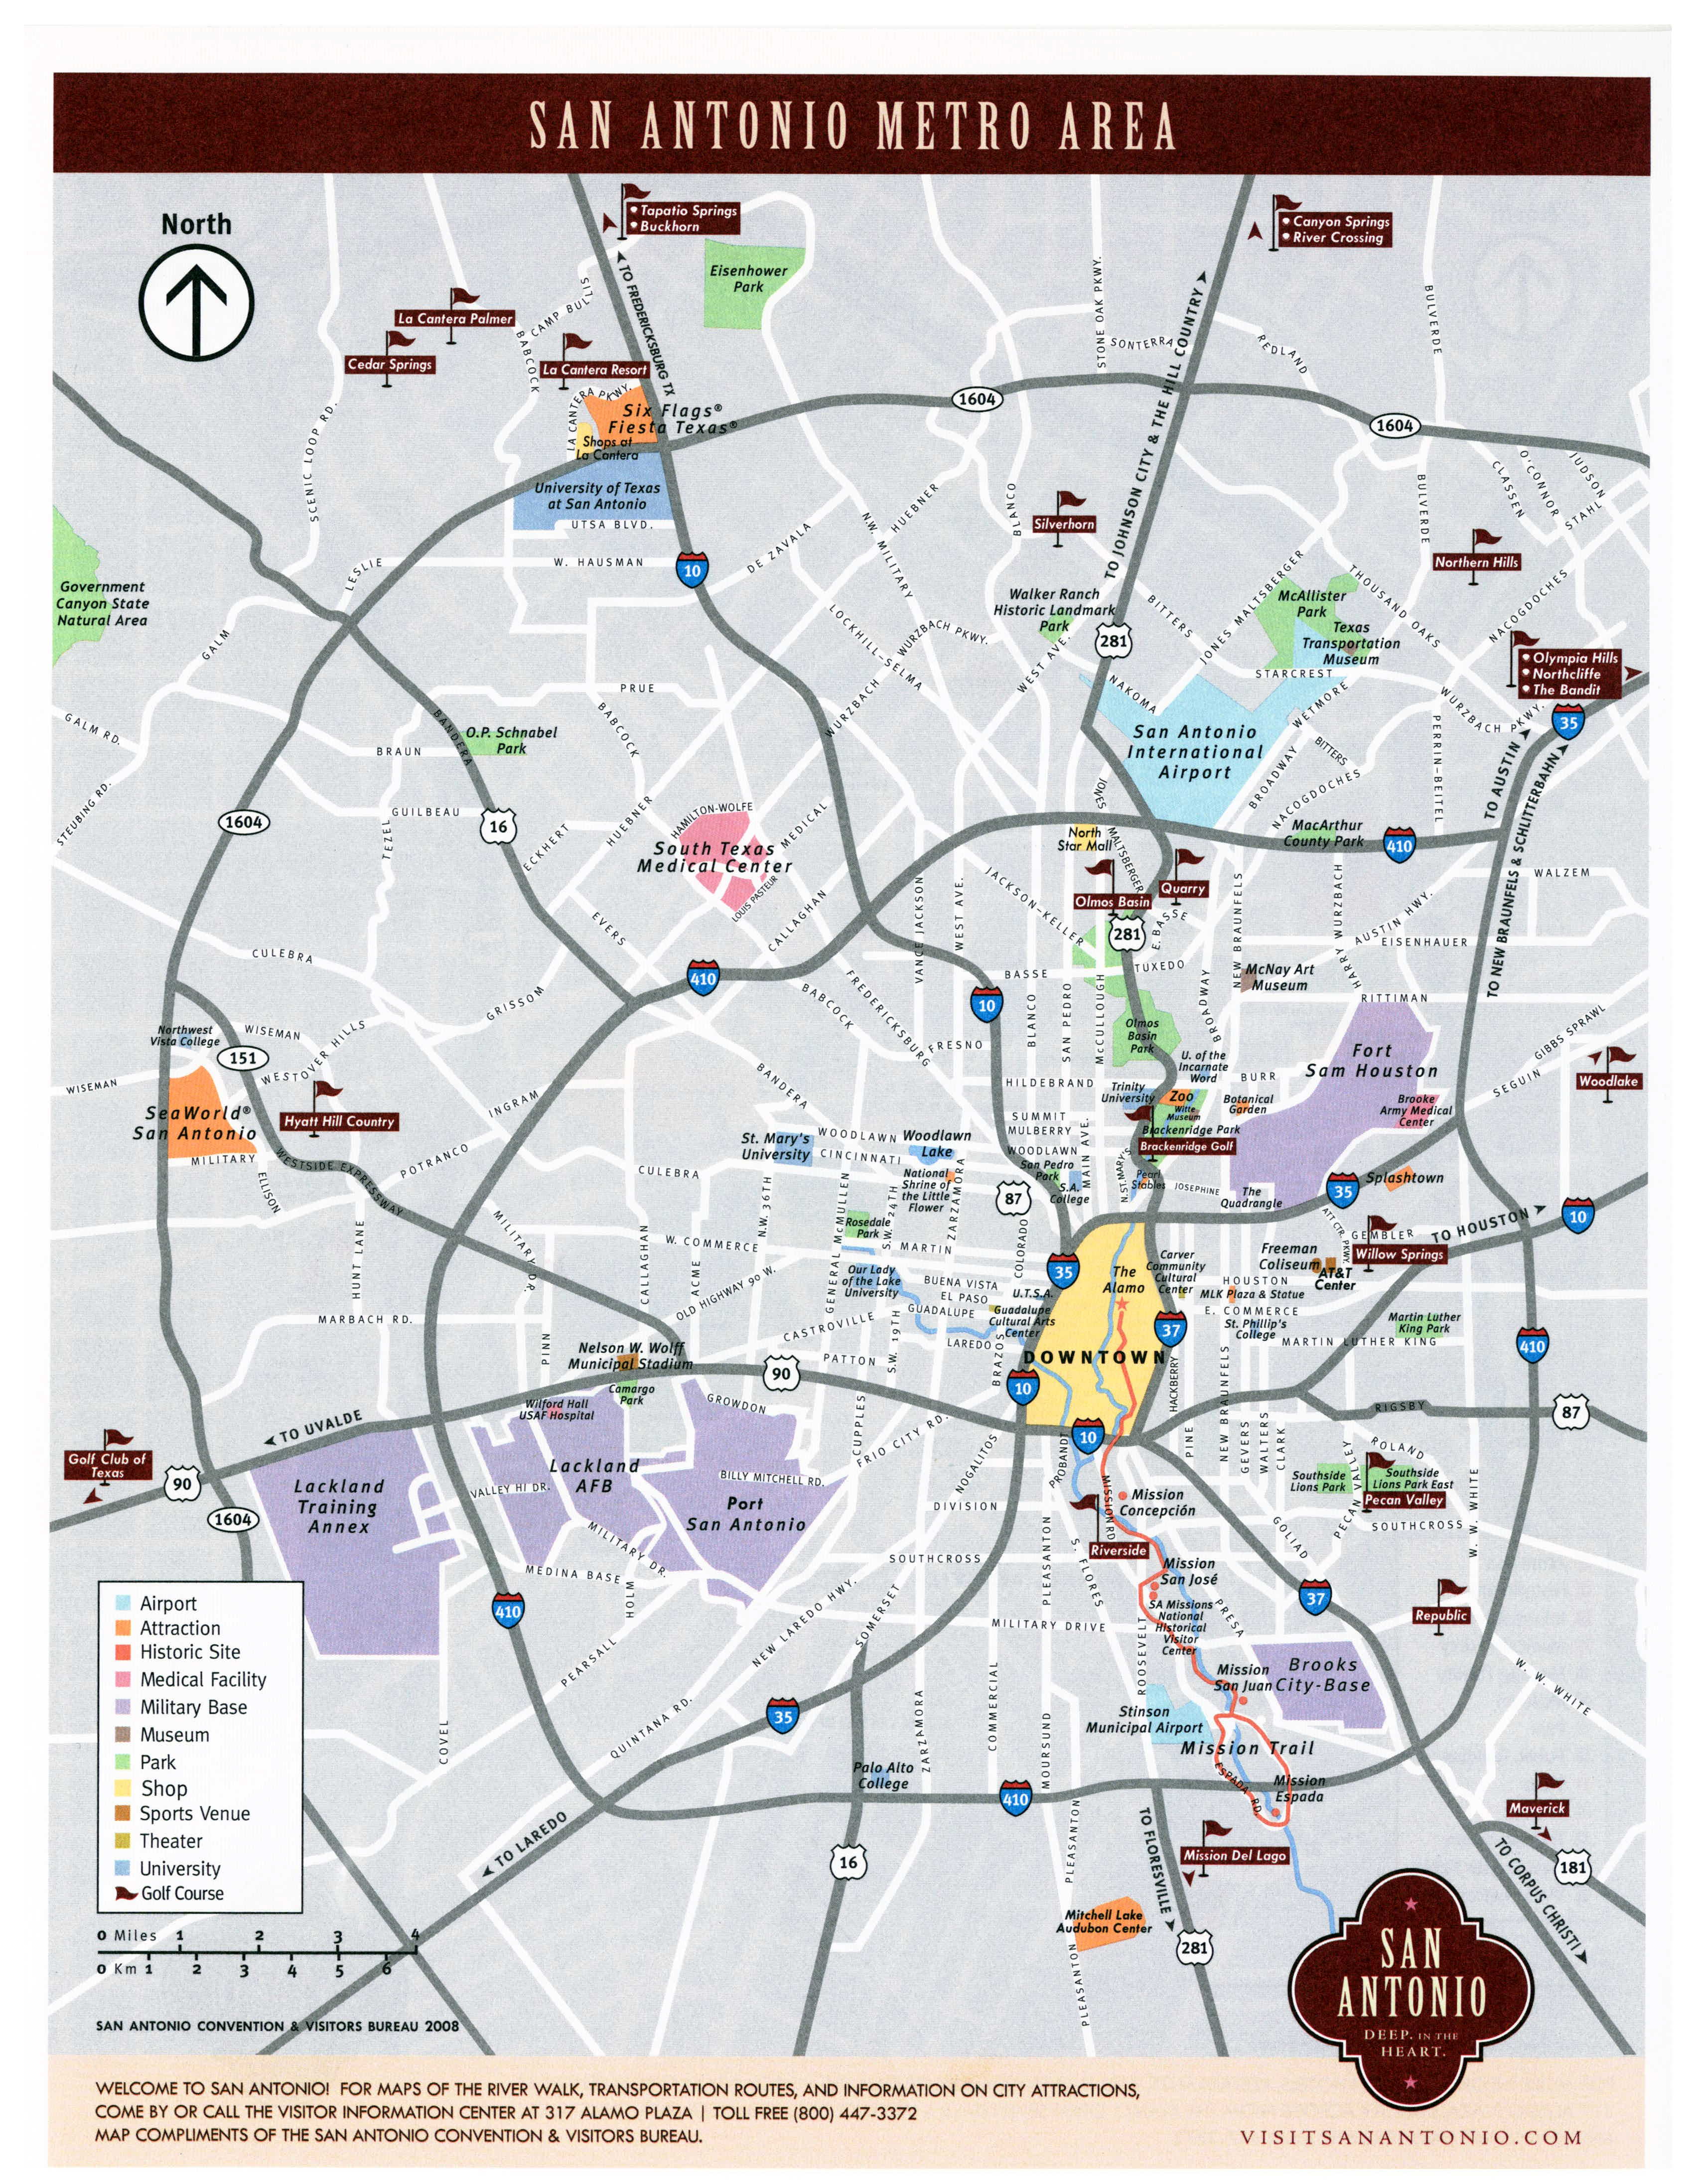 Large San Antonio Maps For Free Download And Print High Resolution And Detailed Maps